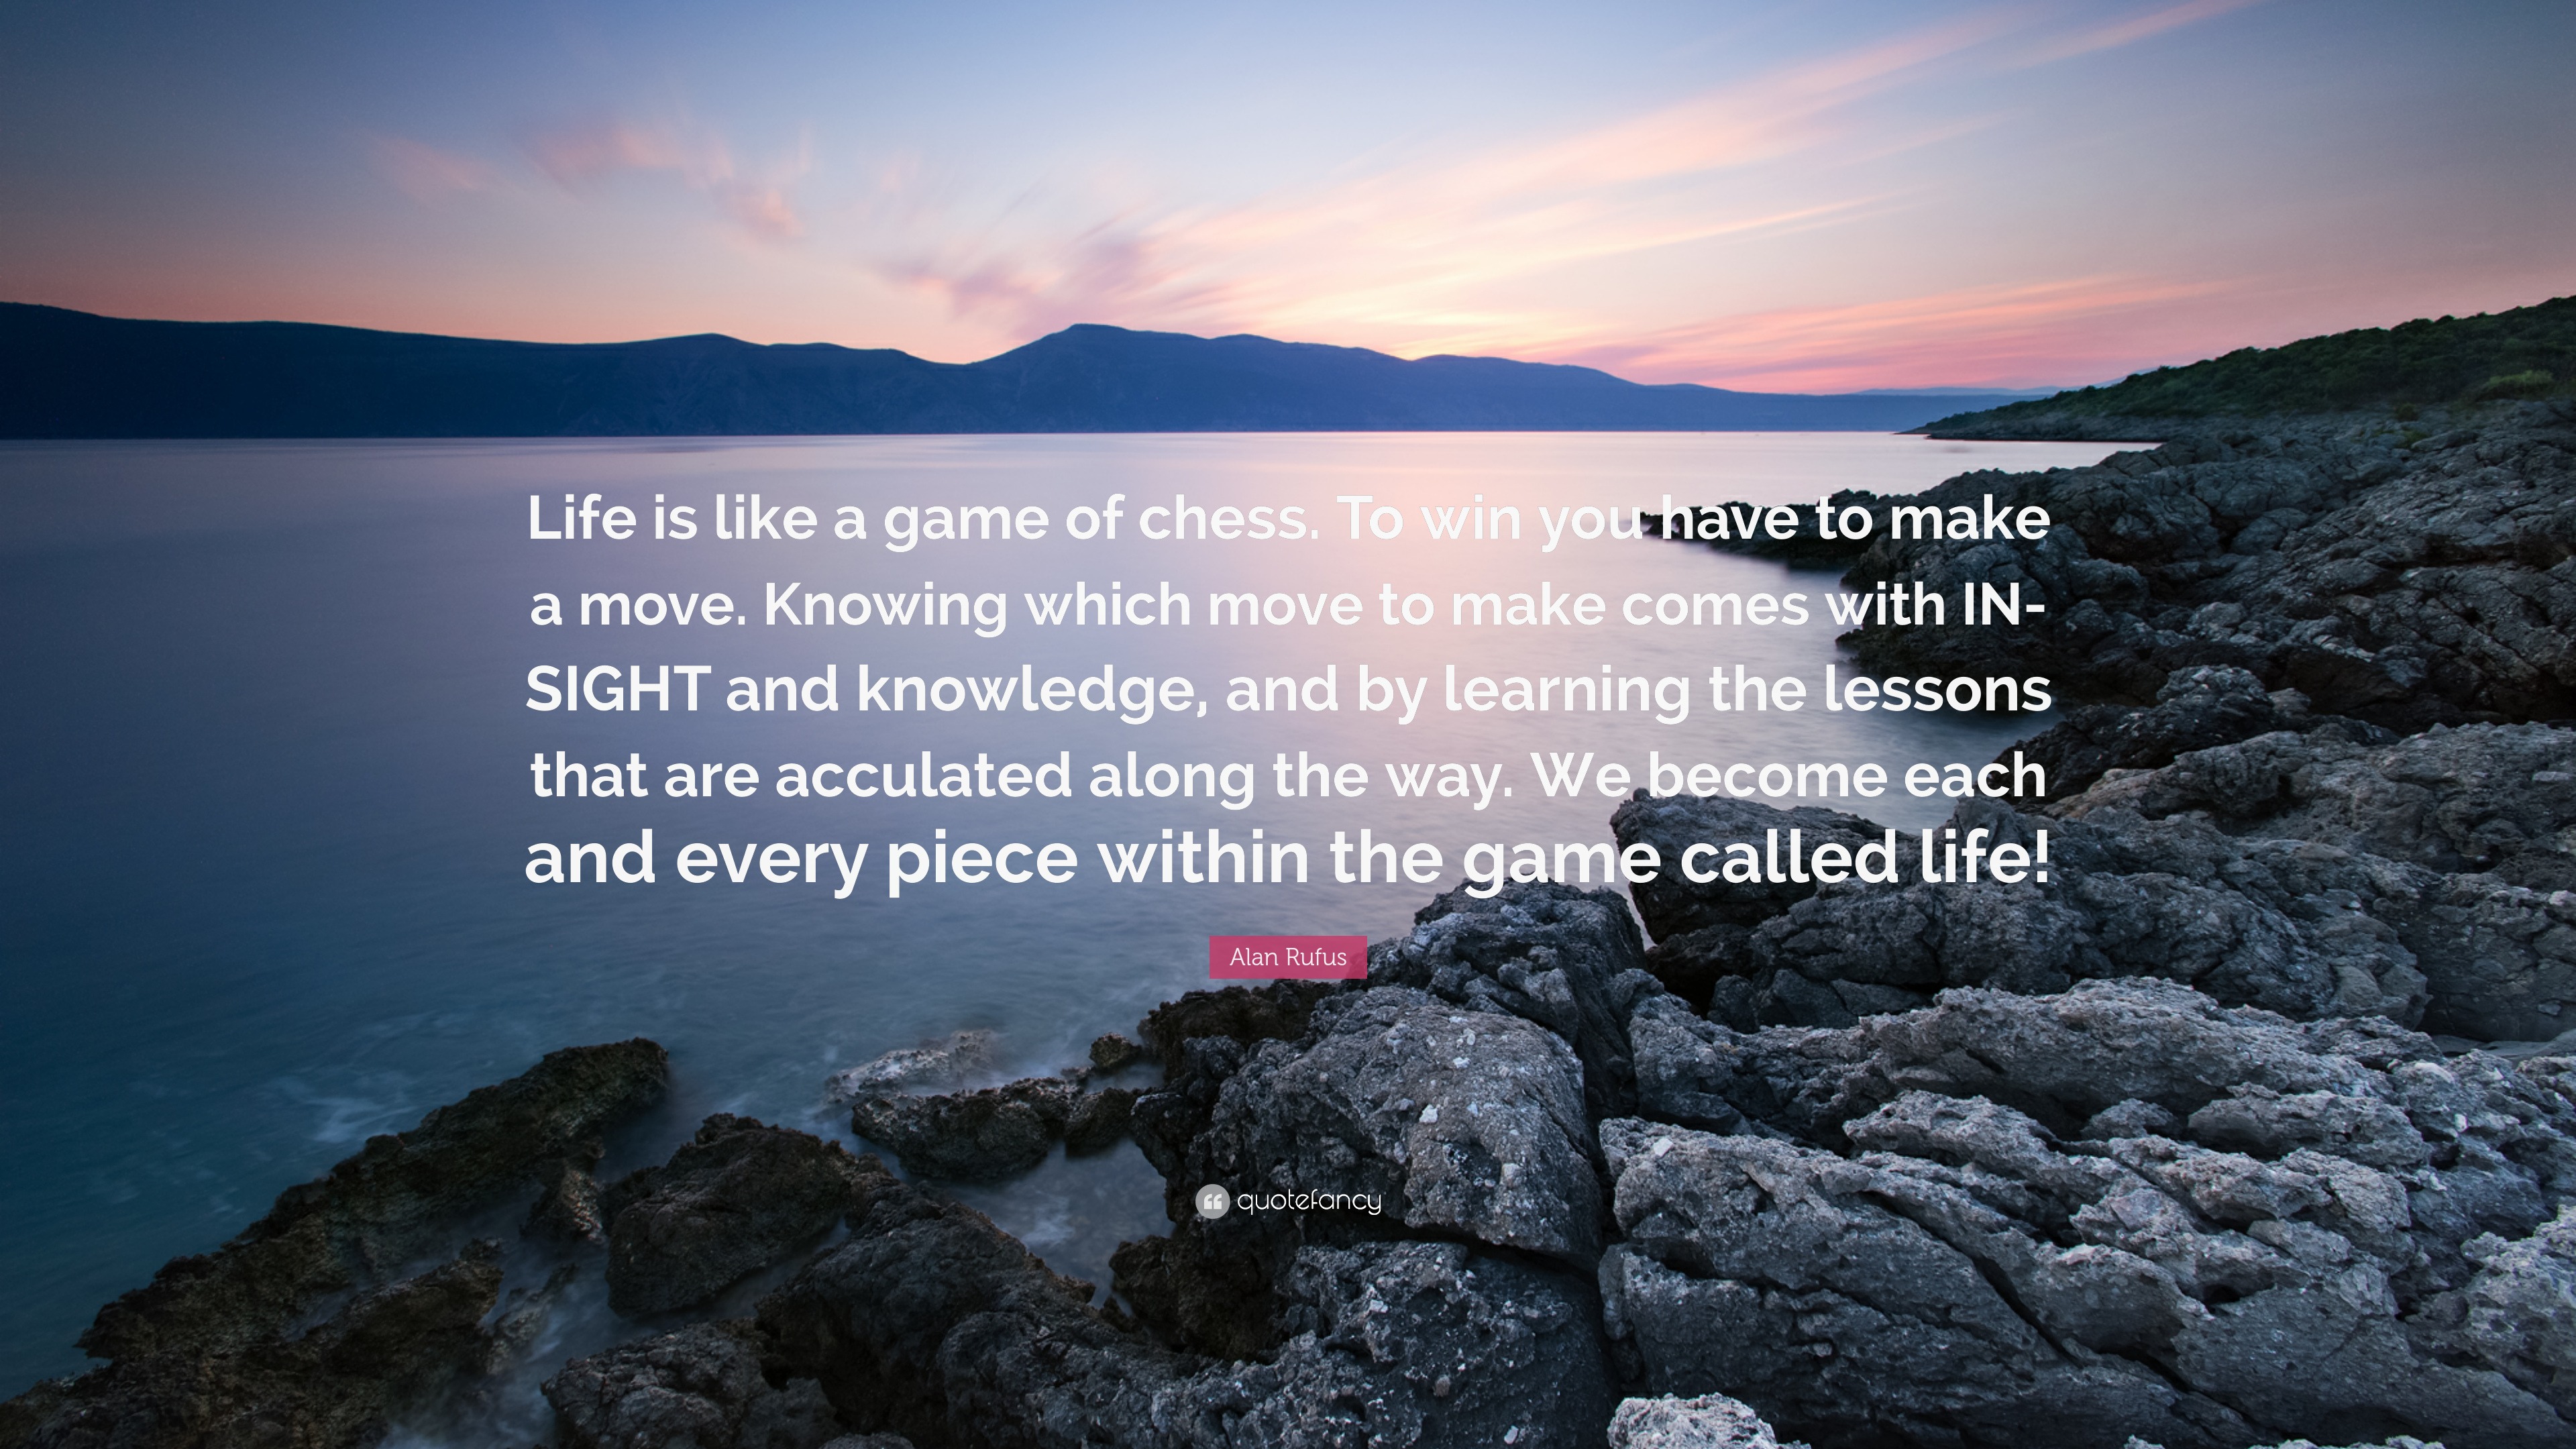 Life is like a game of chess by BeMi90